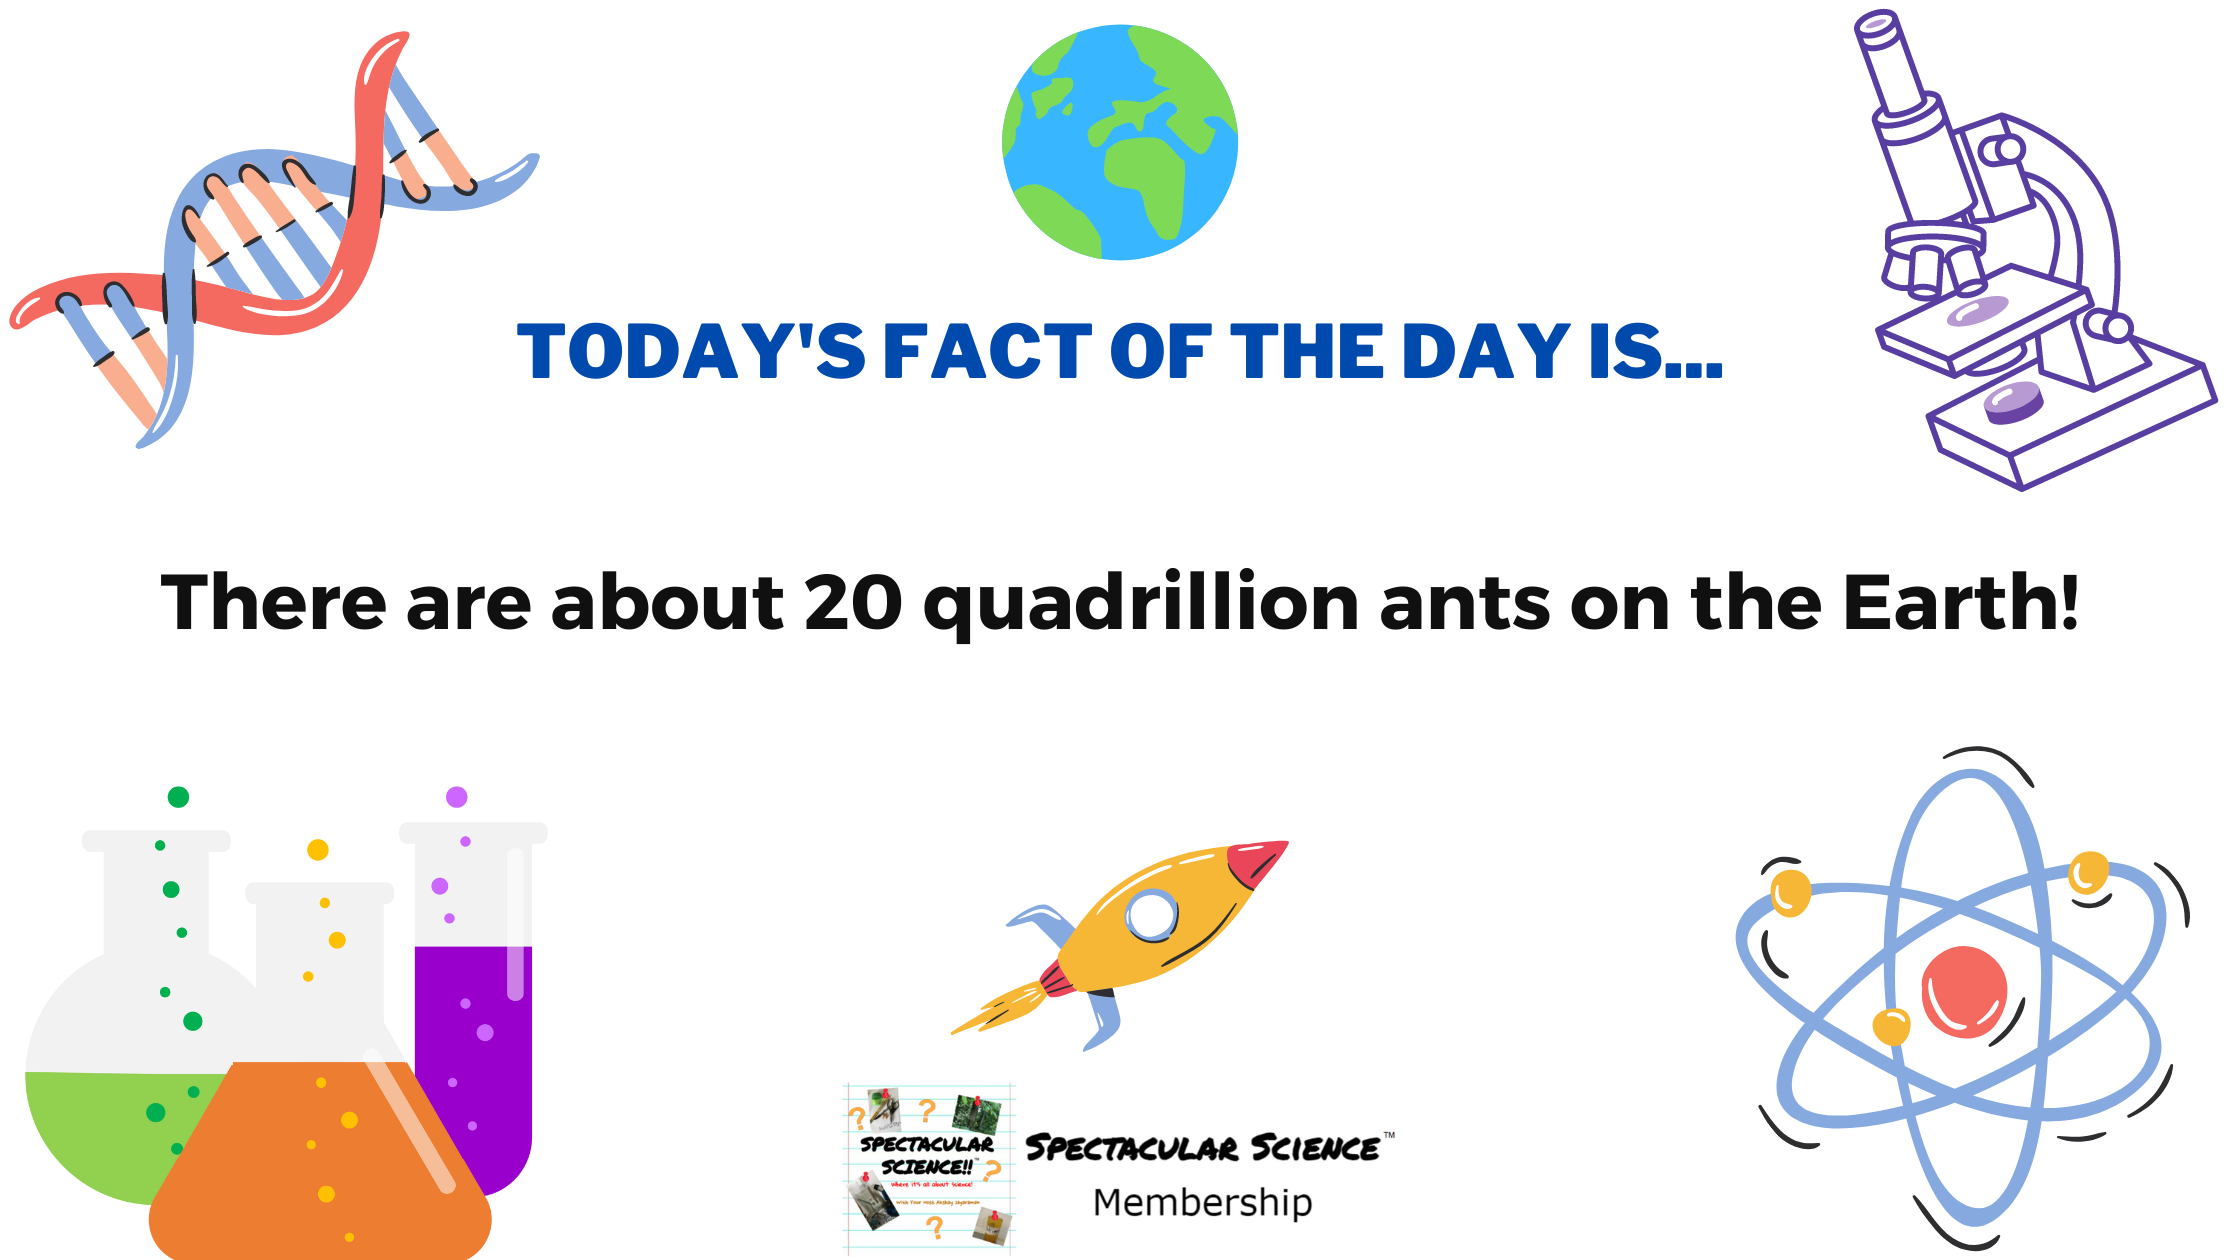 Fact of the Day Image September 30th